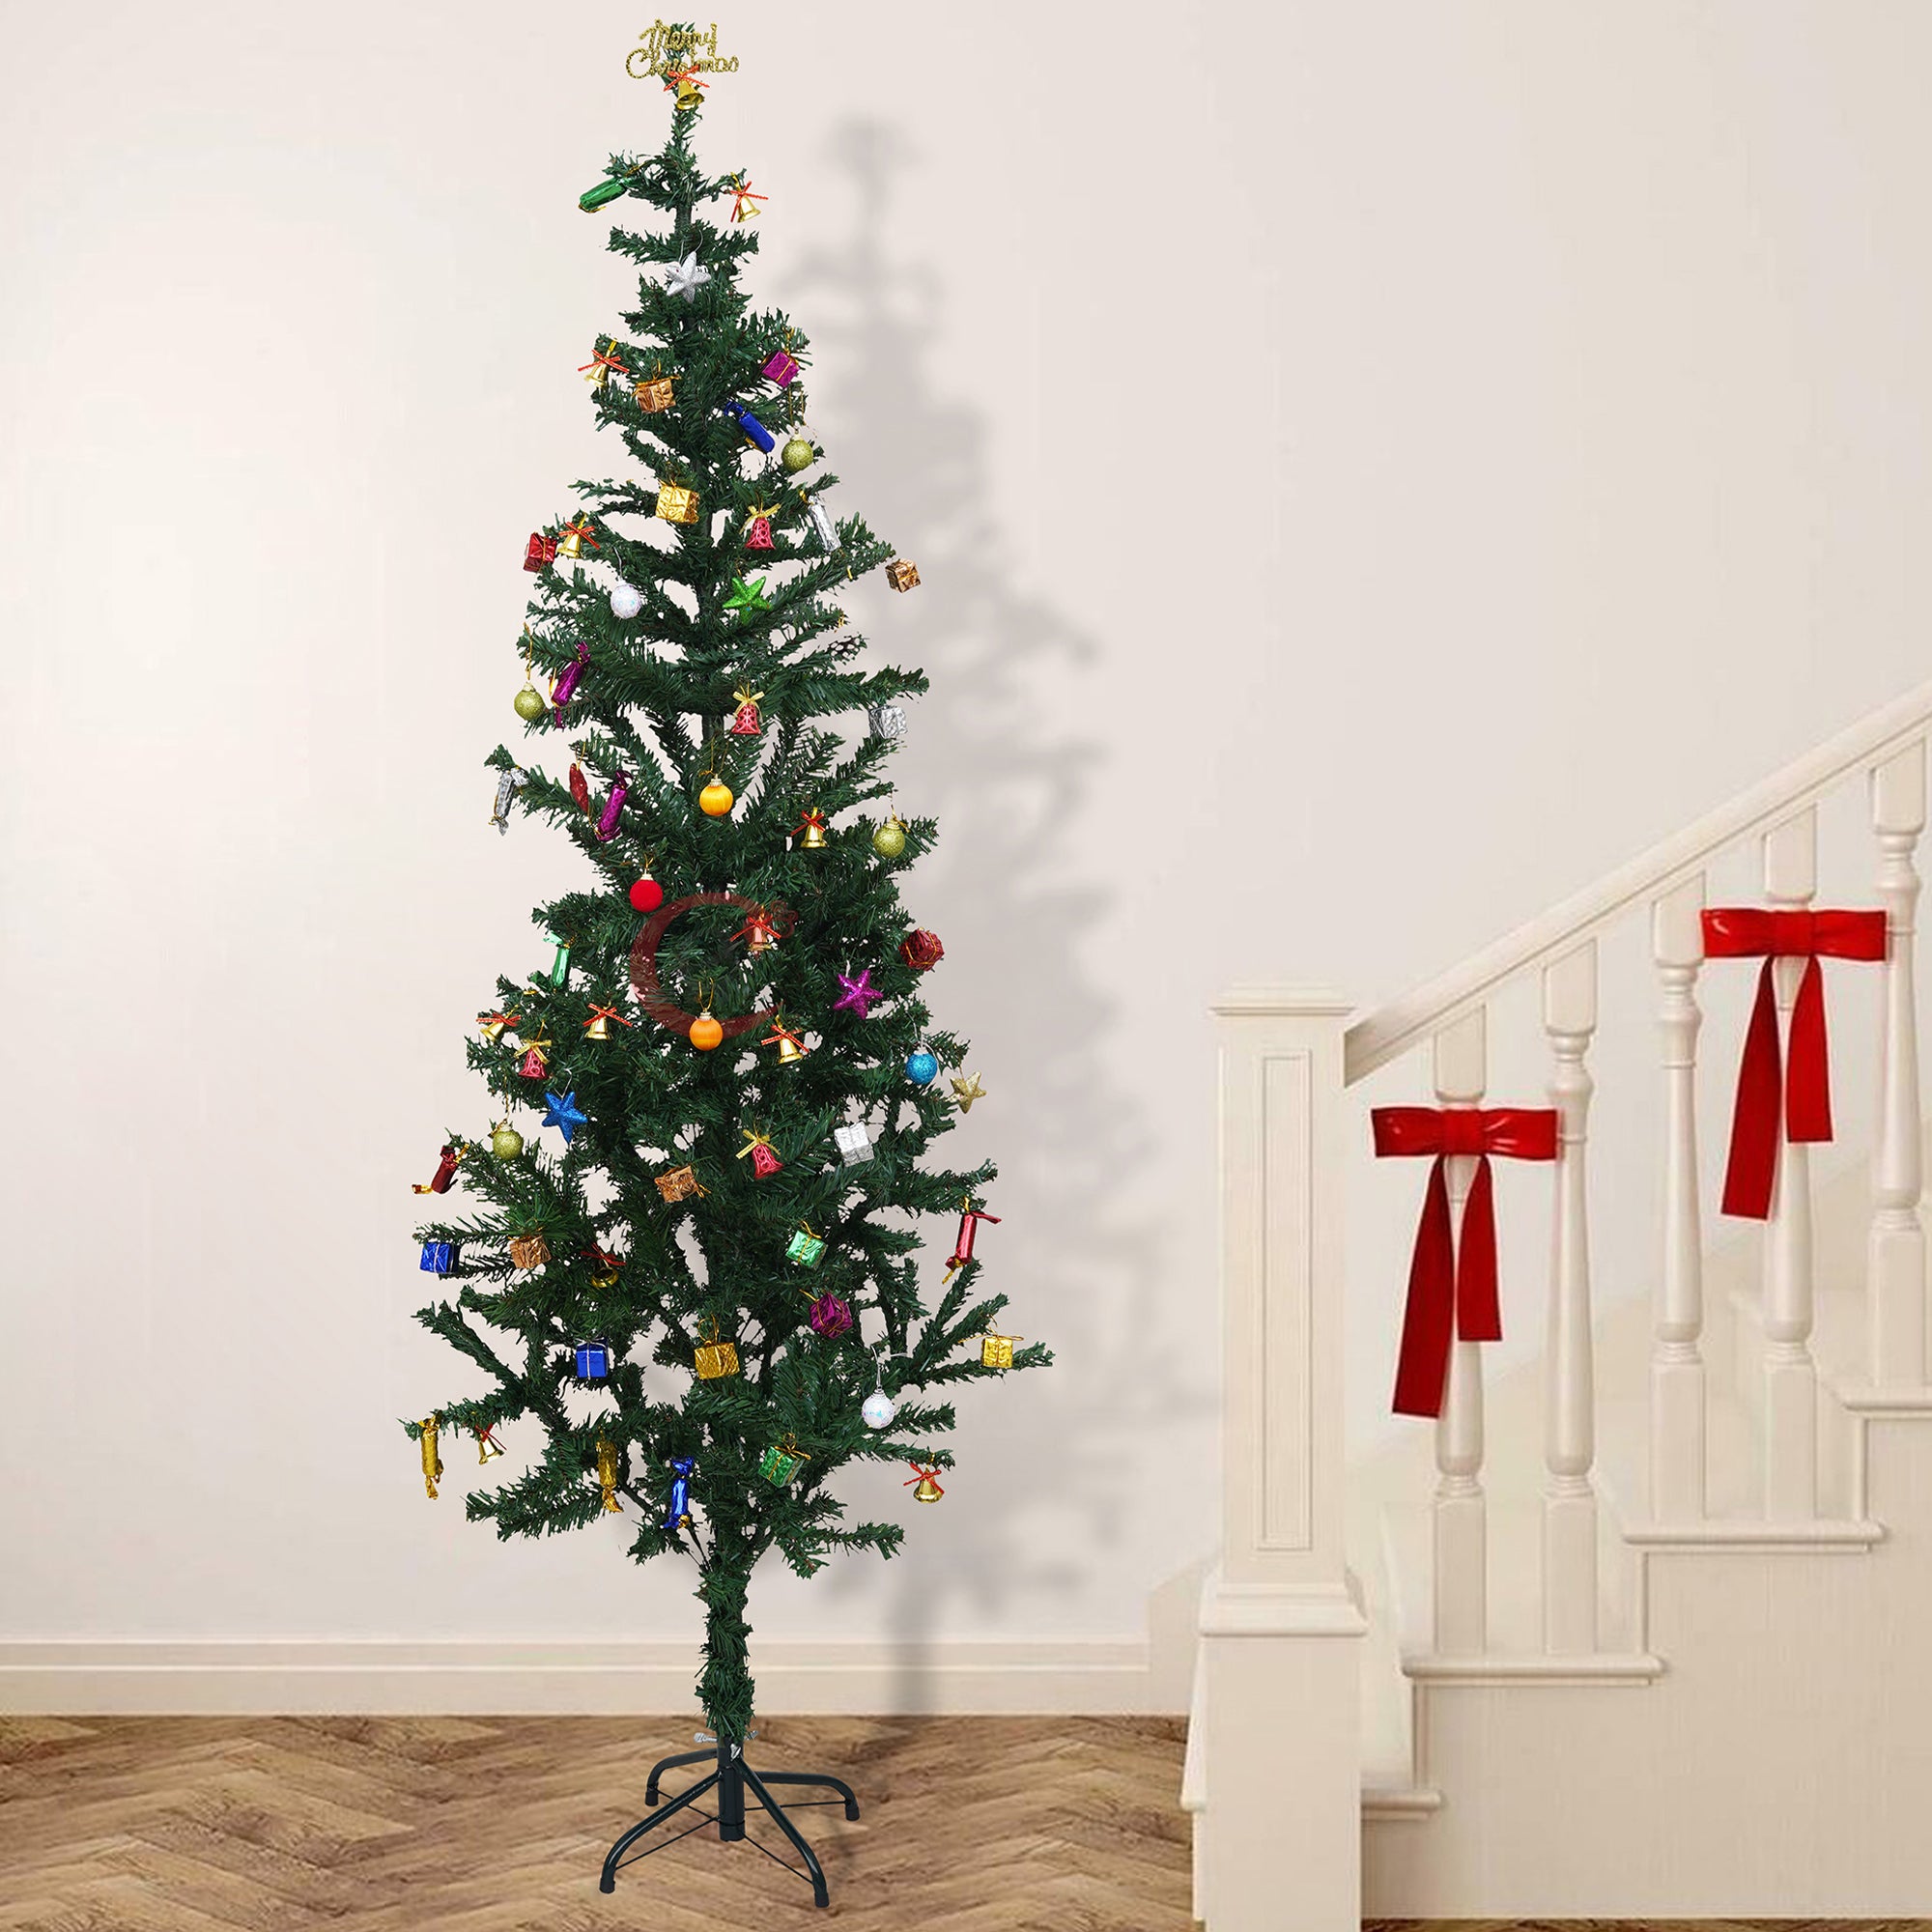 eCraftIndia 6 Feet Green Artificial Christmas Tree Xmas Pine Tree with Metal Stand - Xmas Tree for Indoor, Outdoor, Home, Living Room, Office, Church Decor - Merry Christmas Decoration Item 5